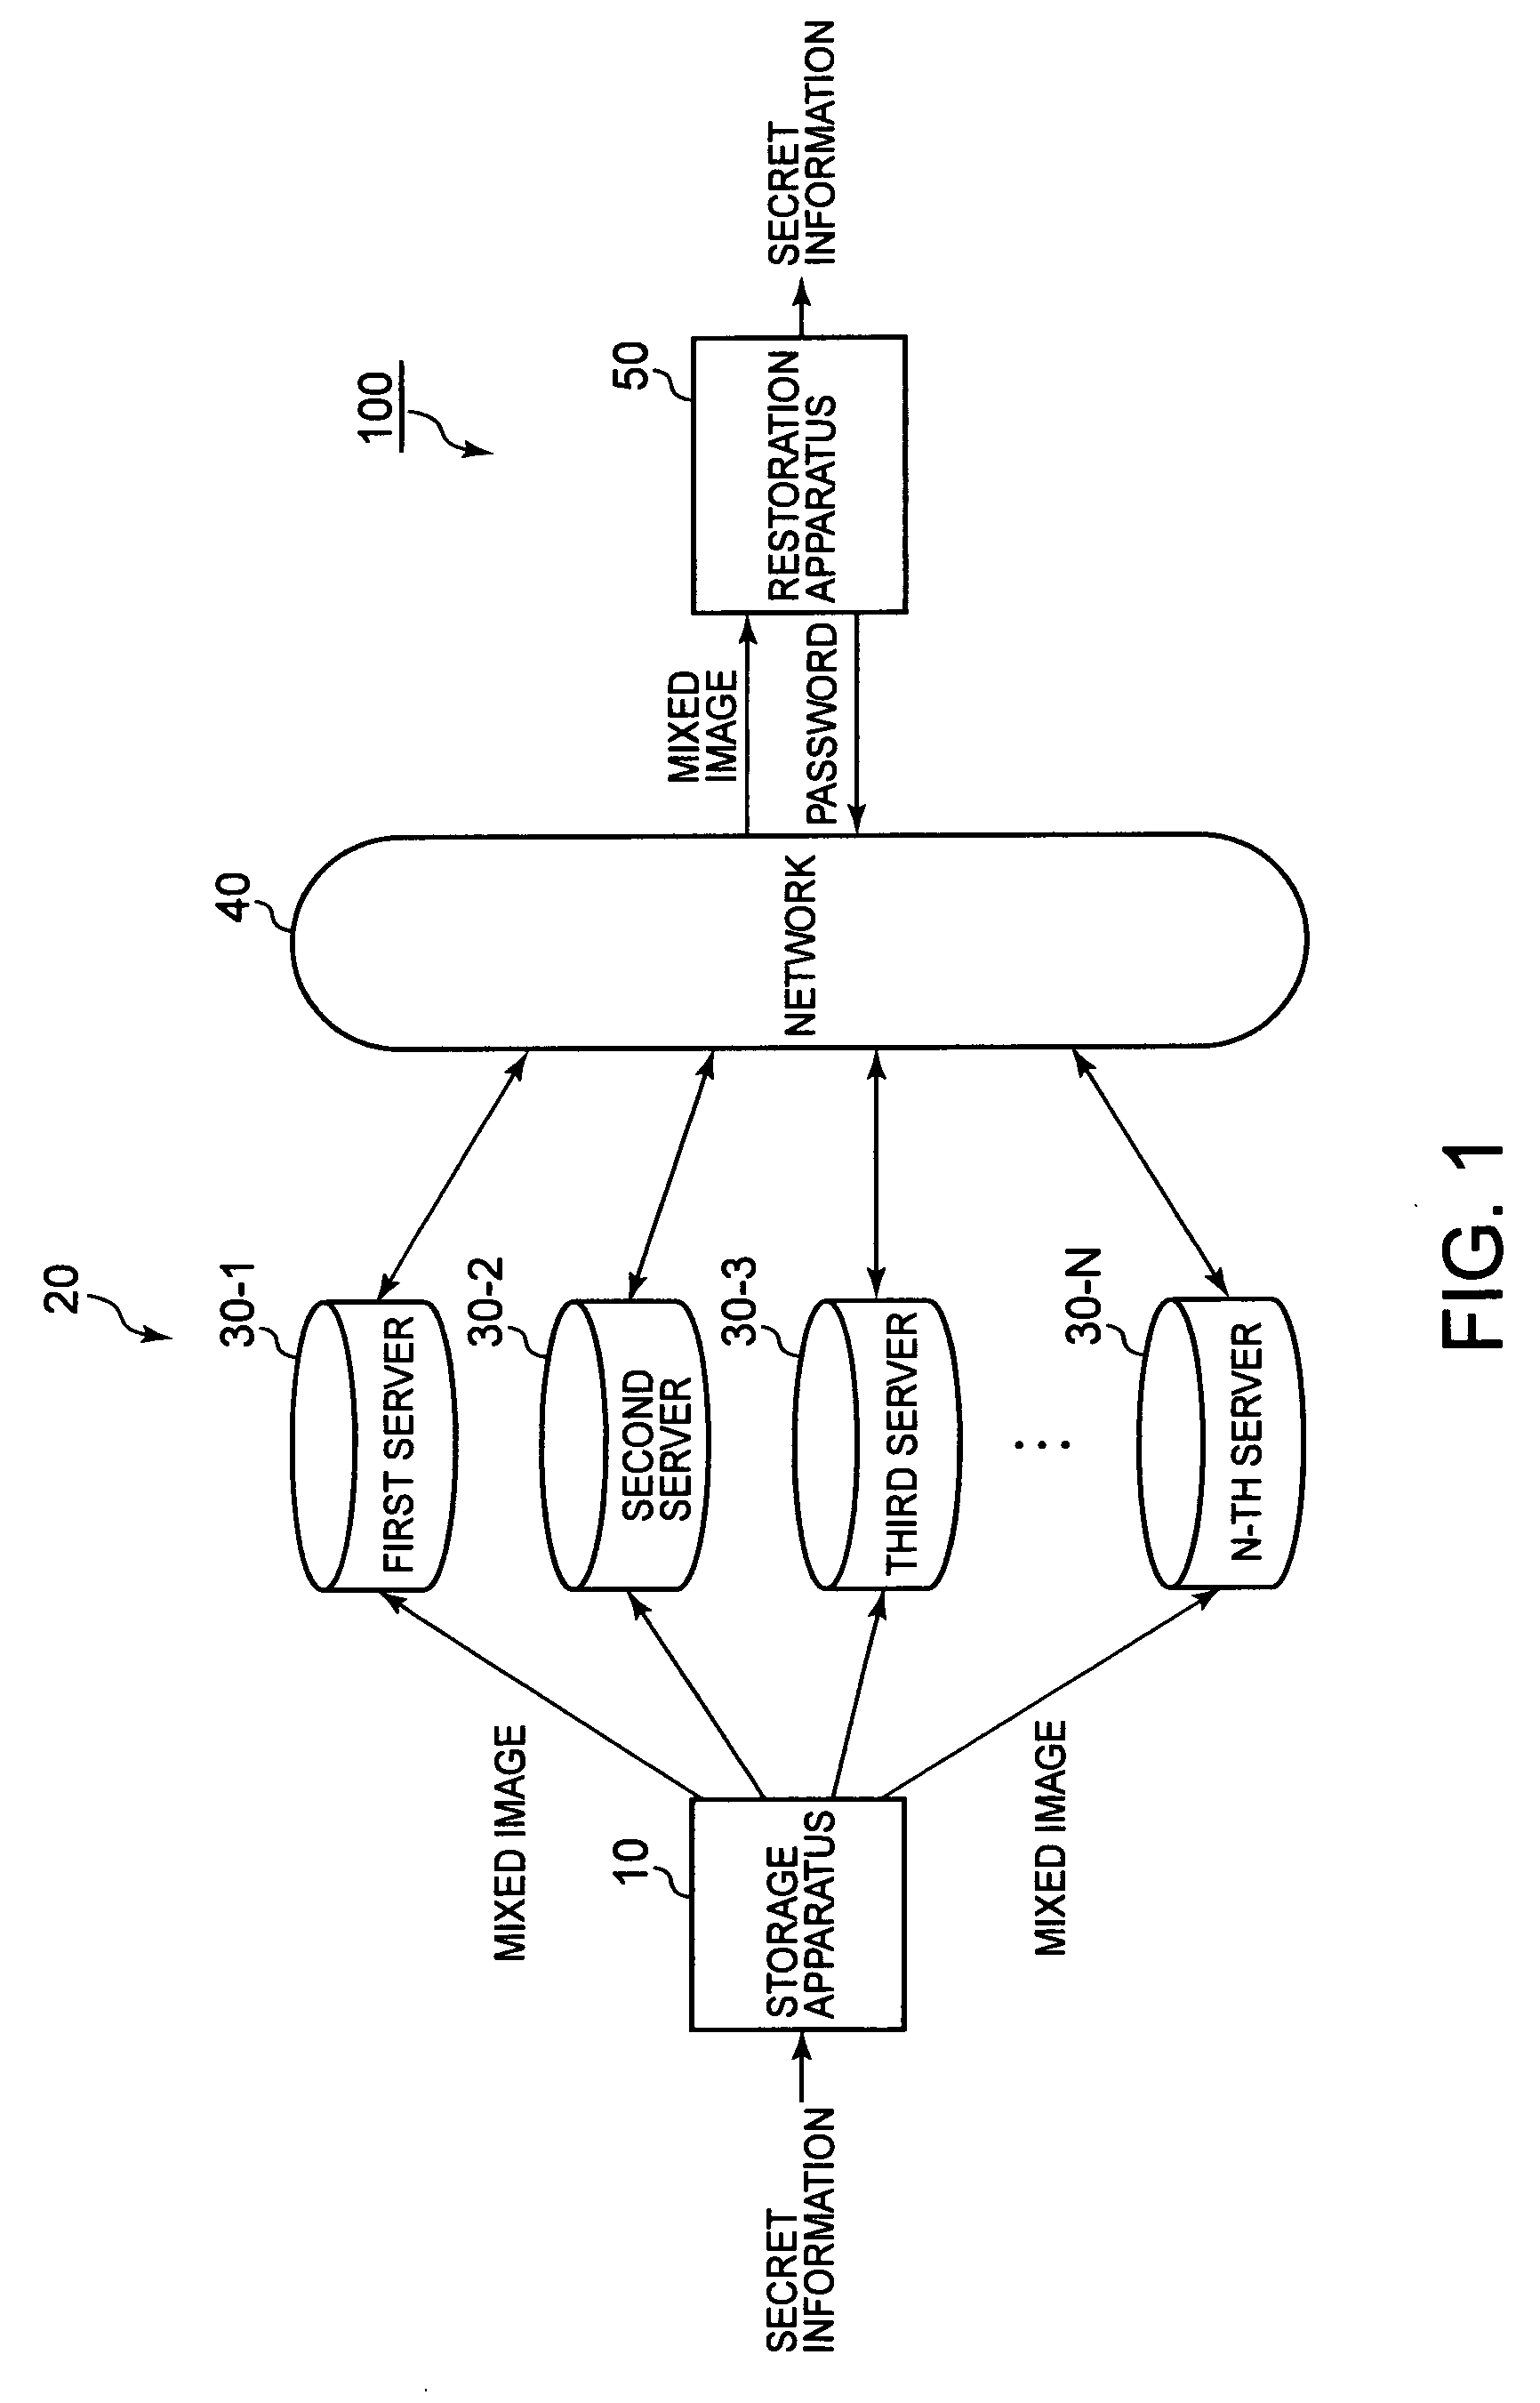 Method and apparatus for distributed management of files